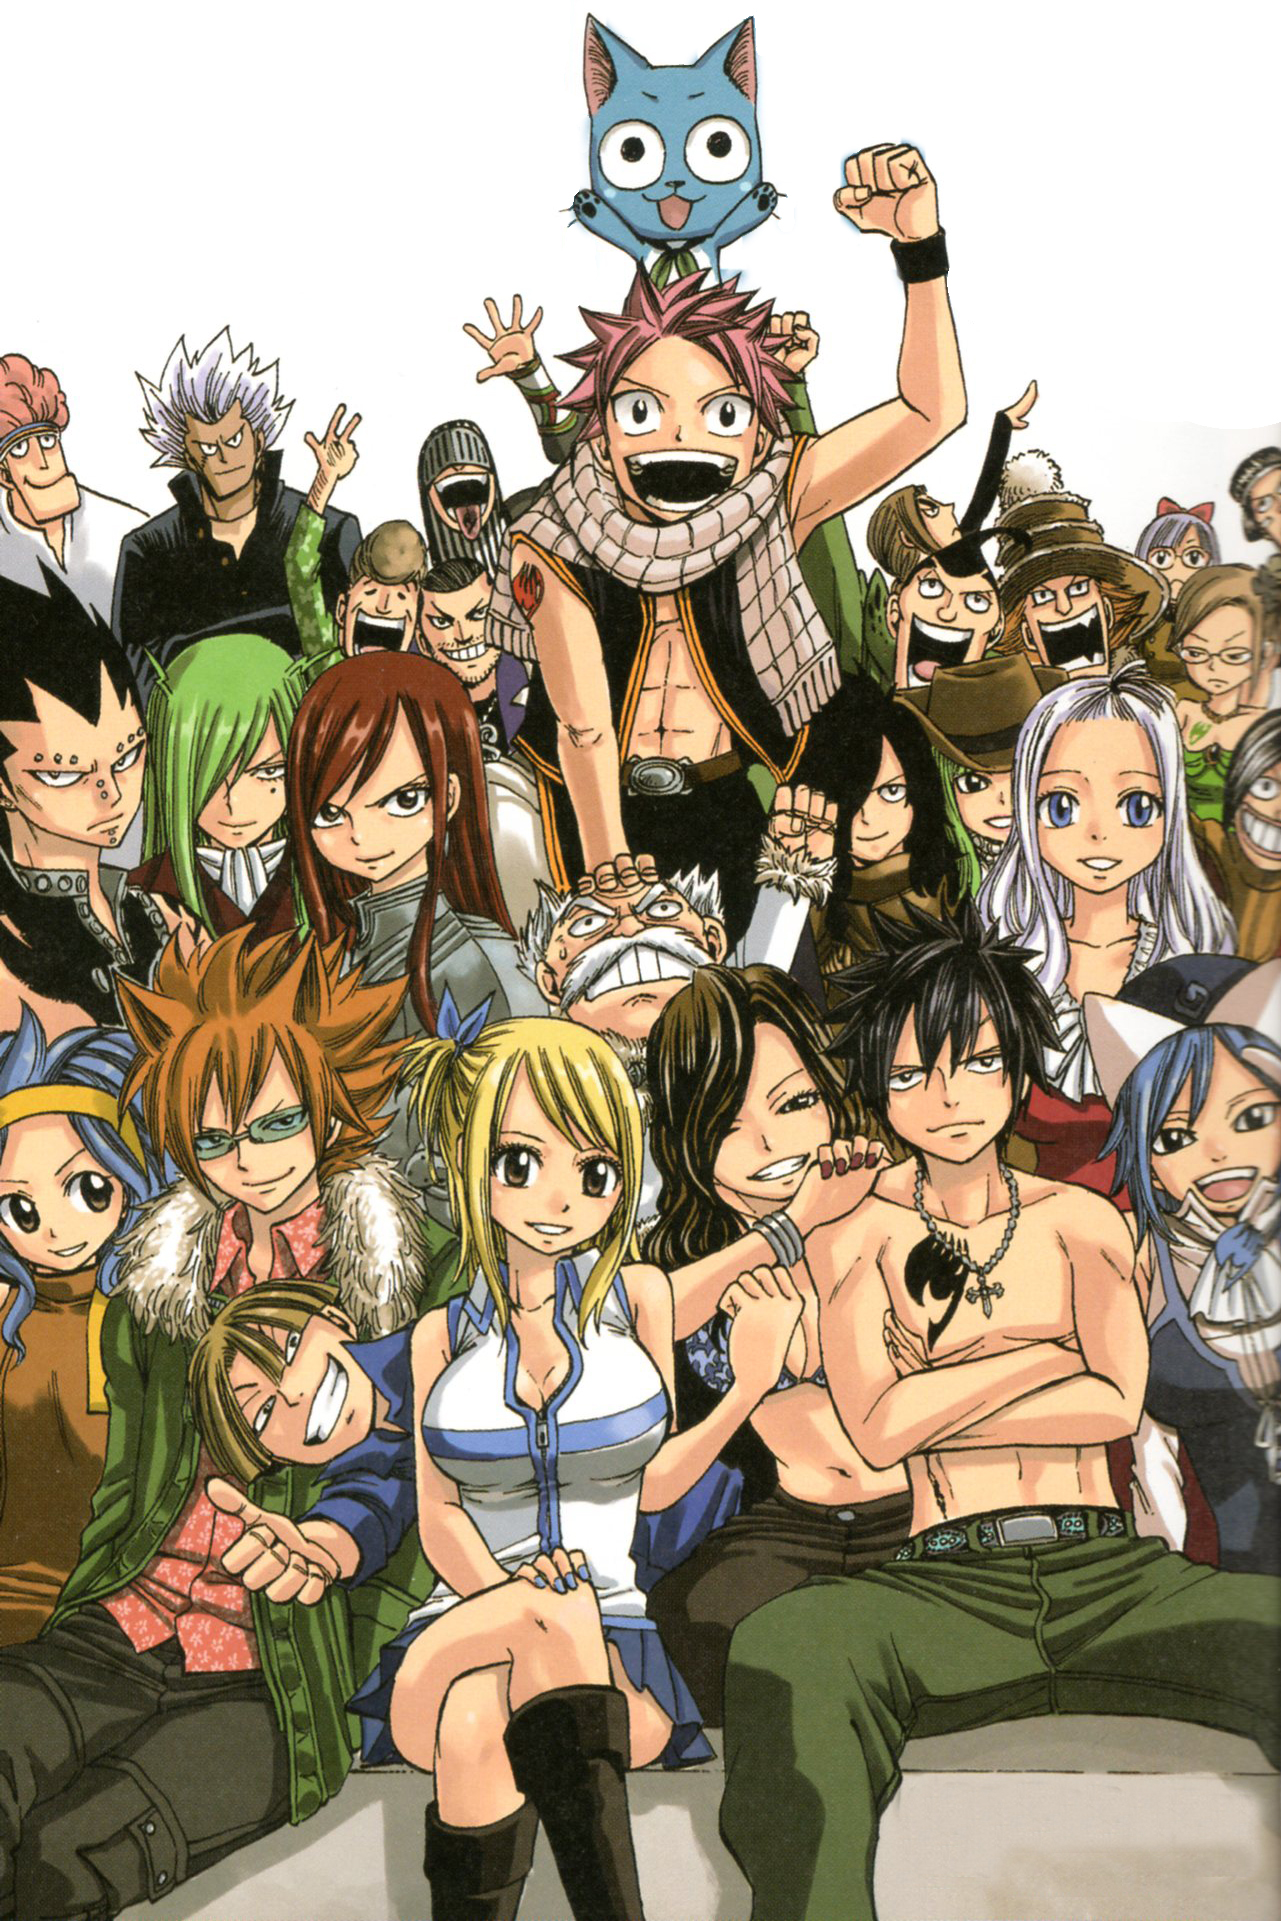 Pin by Bear J on Fairy tail Cards | Fairy tail anime, Fairy tail manga, Fairy  tail female characters